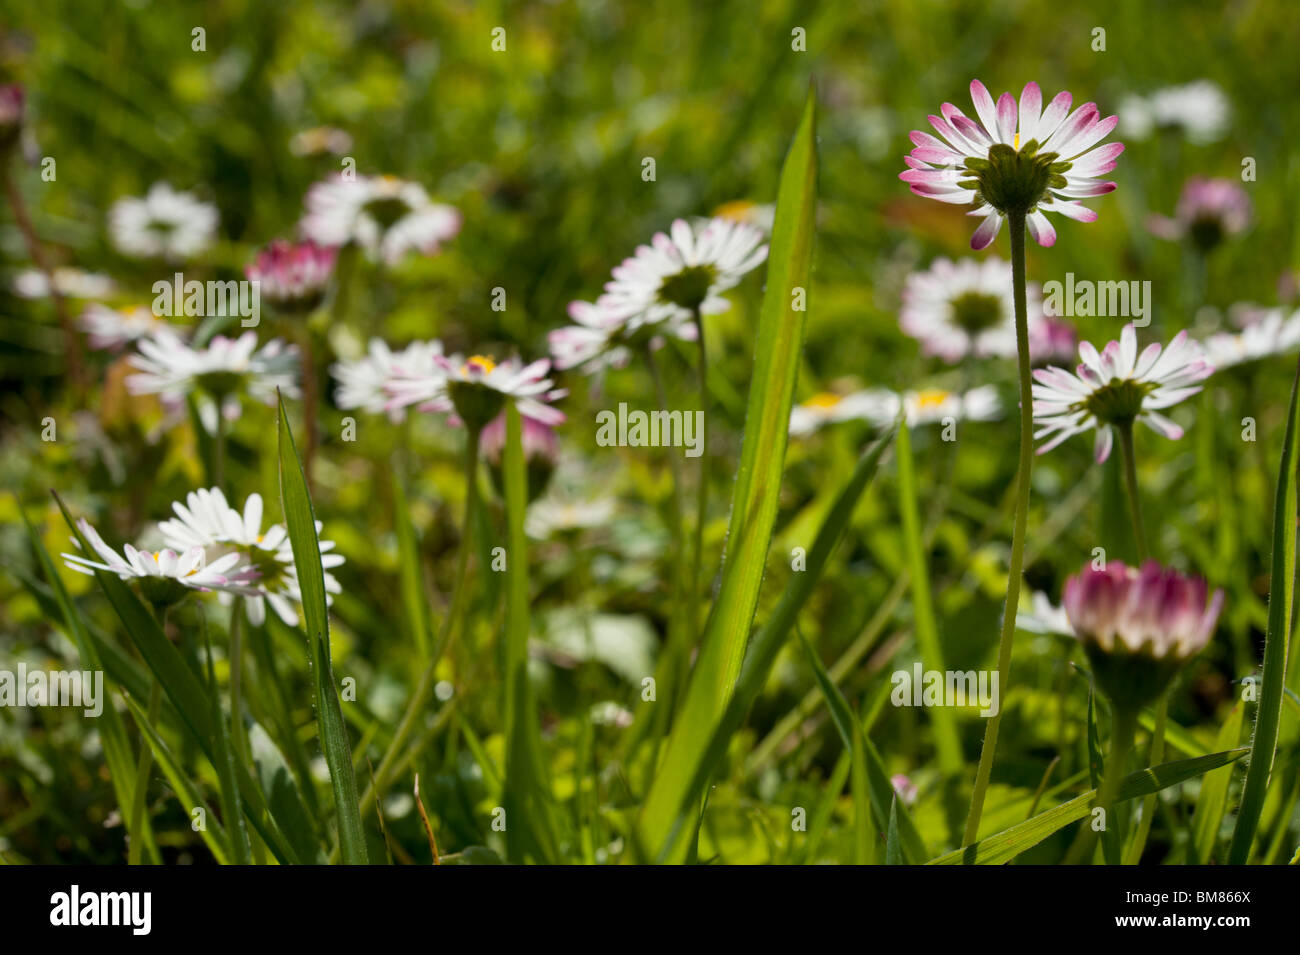 Lawn daisies (Bellis perennis) amidst the grass on a sunny day. Stock Photo